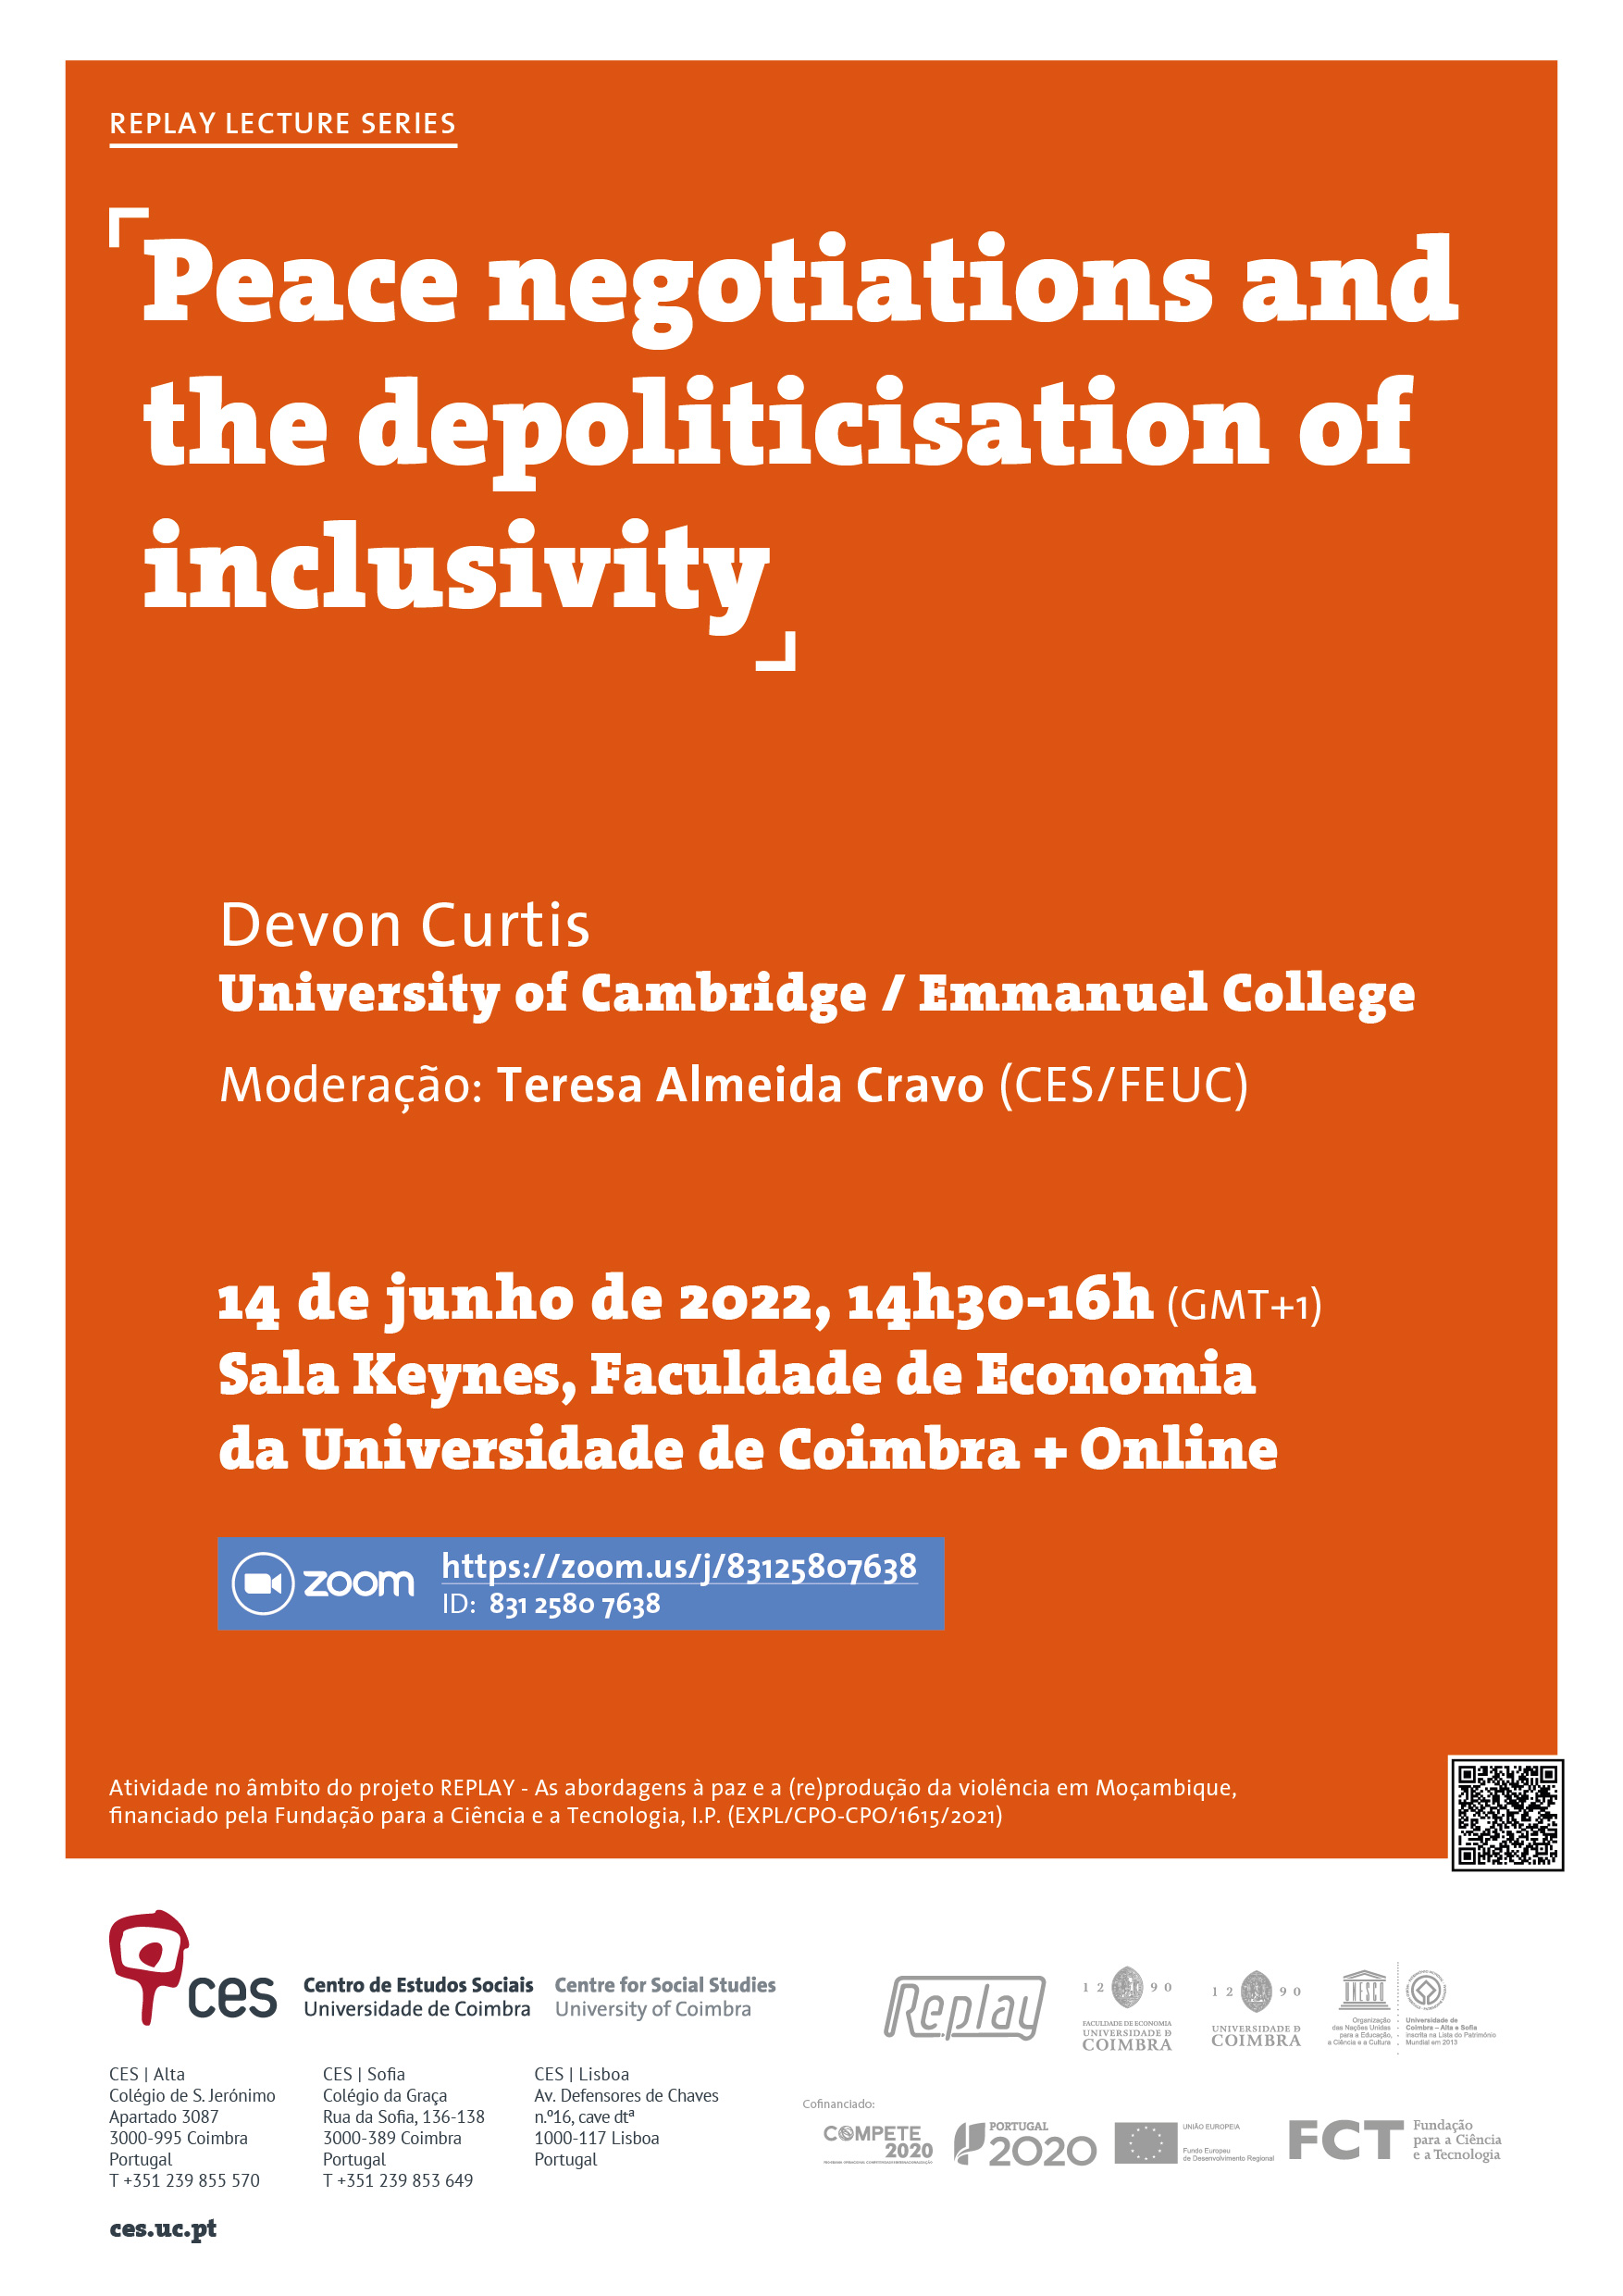 Peace negotiations and the depoliticisation of inclusivity<br />
	 <span id="edit_39240"><script>$(function() { $('#edit_39240').load( "/myces/user/editobj.php?tipo=evento&id=39240" ); });</script></span>